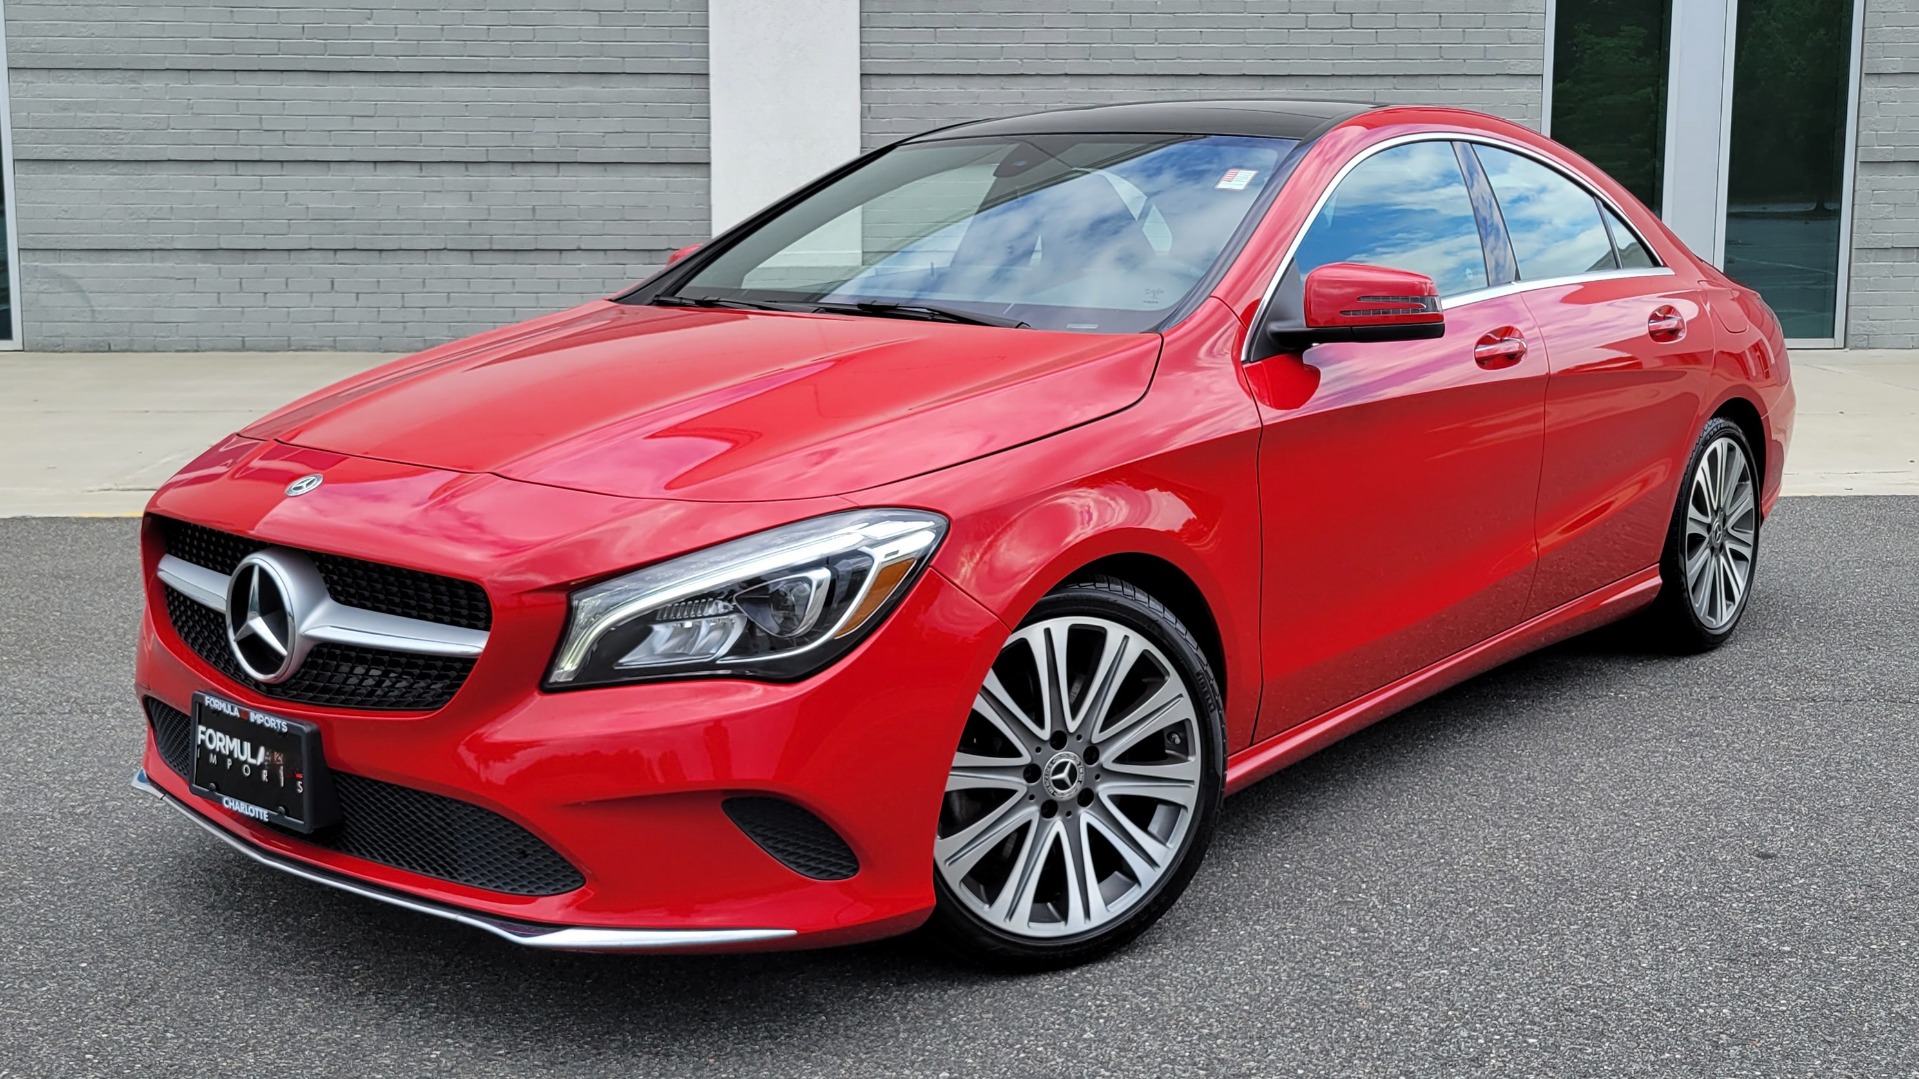 Used 2019 Mercedes-Benz CLA 250 PREMIUM / CONV PKG / PANO-ROOF / H/K SND / CAMERA for sale Sold at Formula Imports in Charlotte NC 28227 1